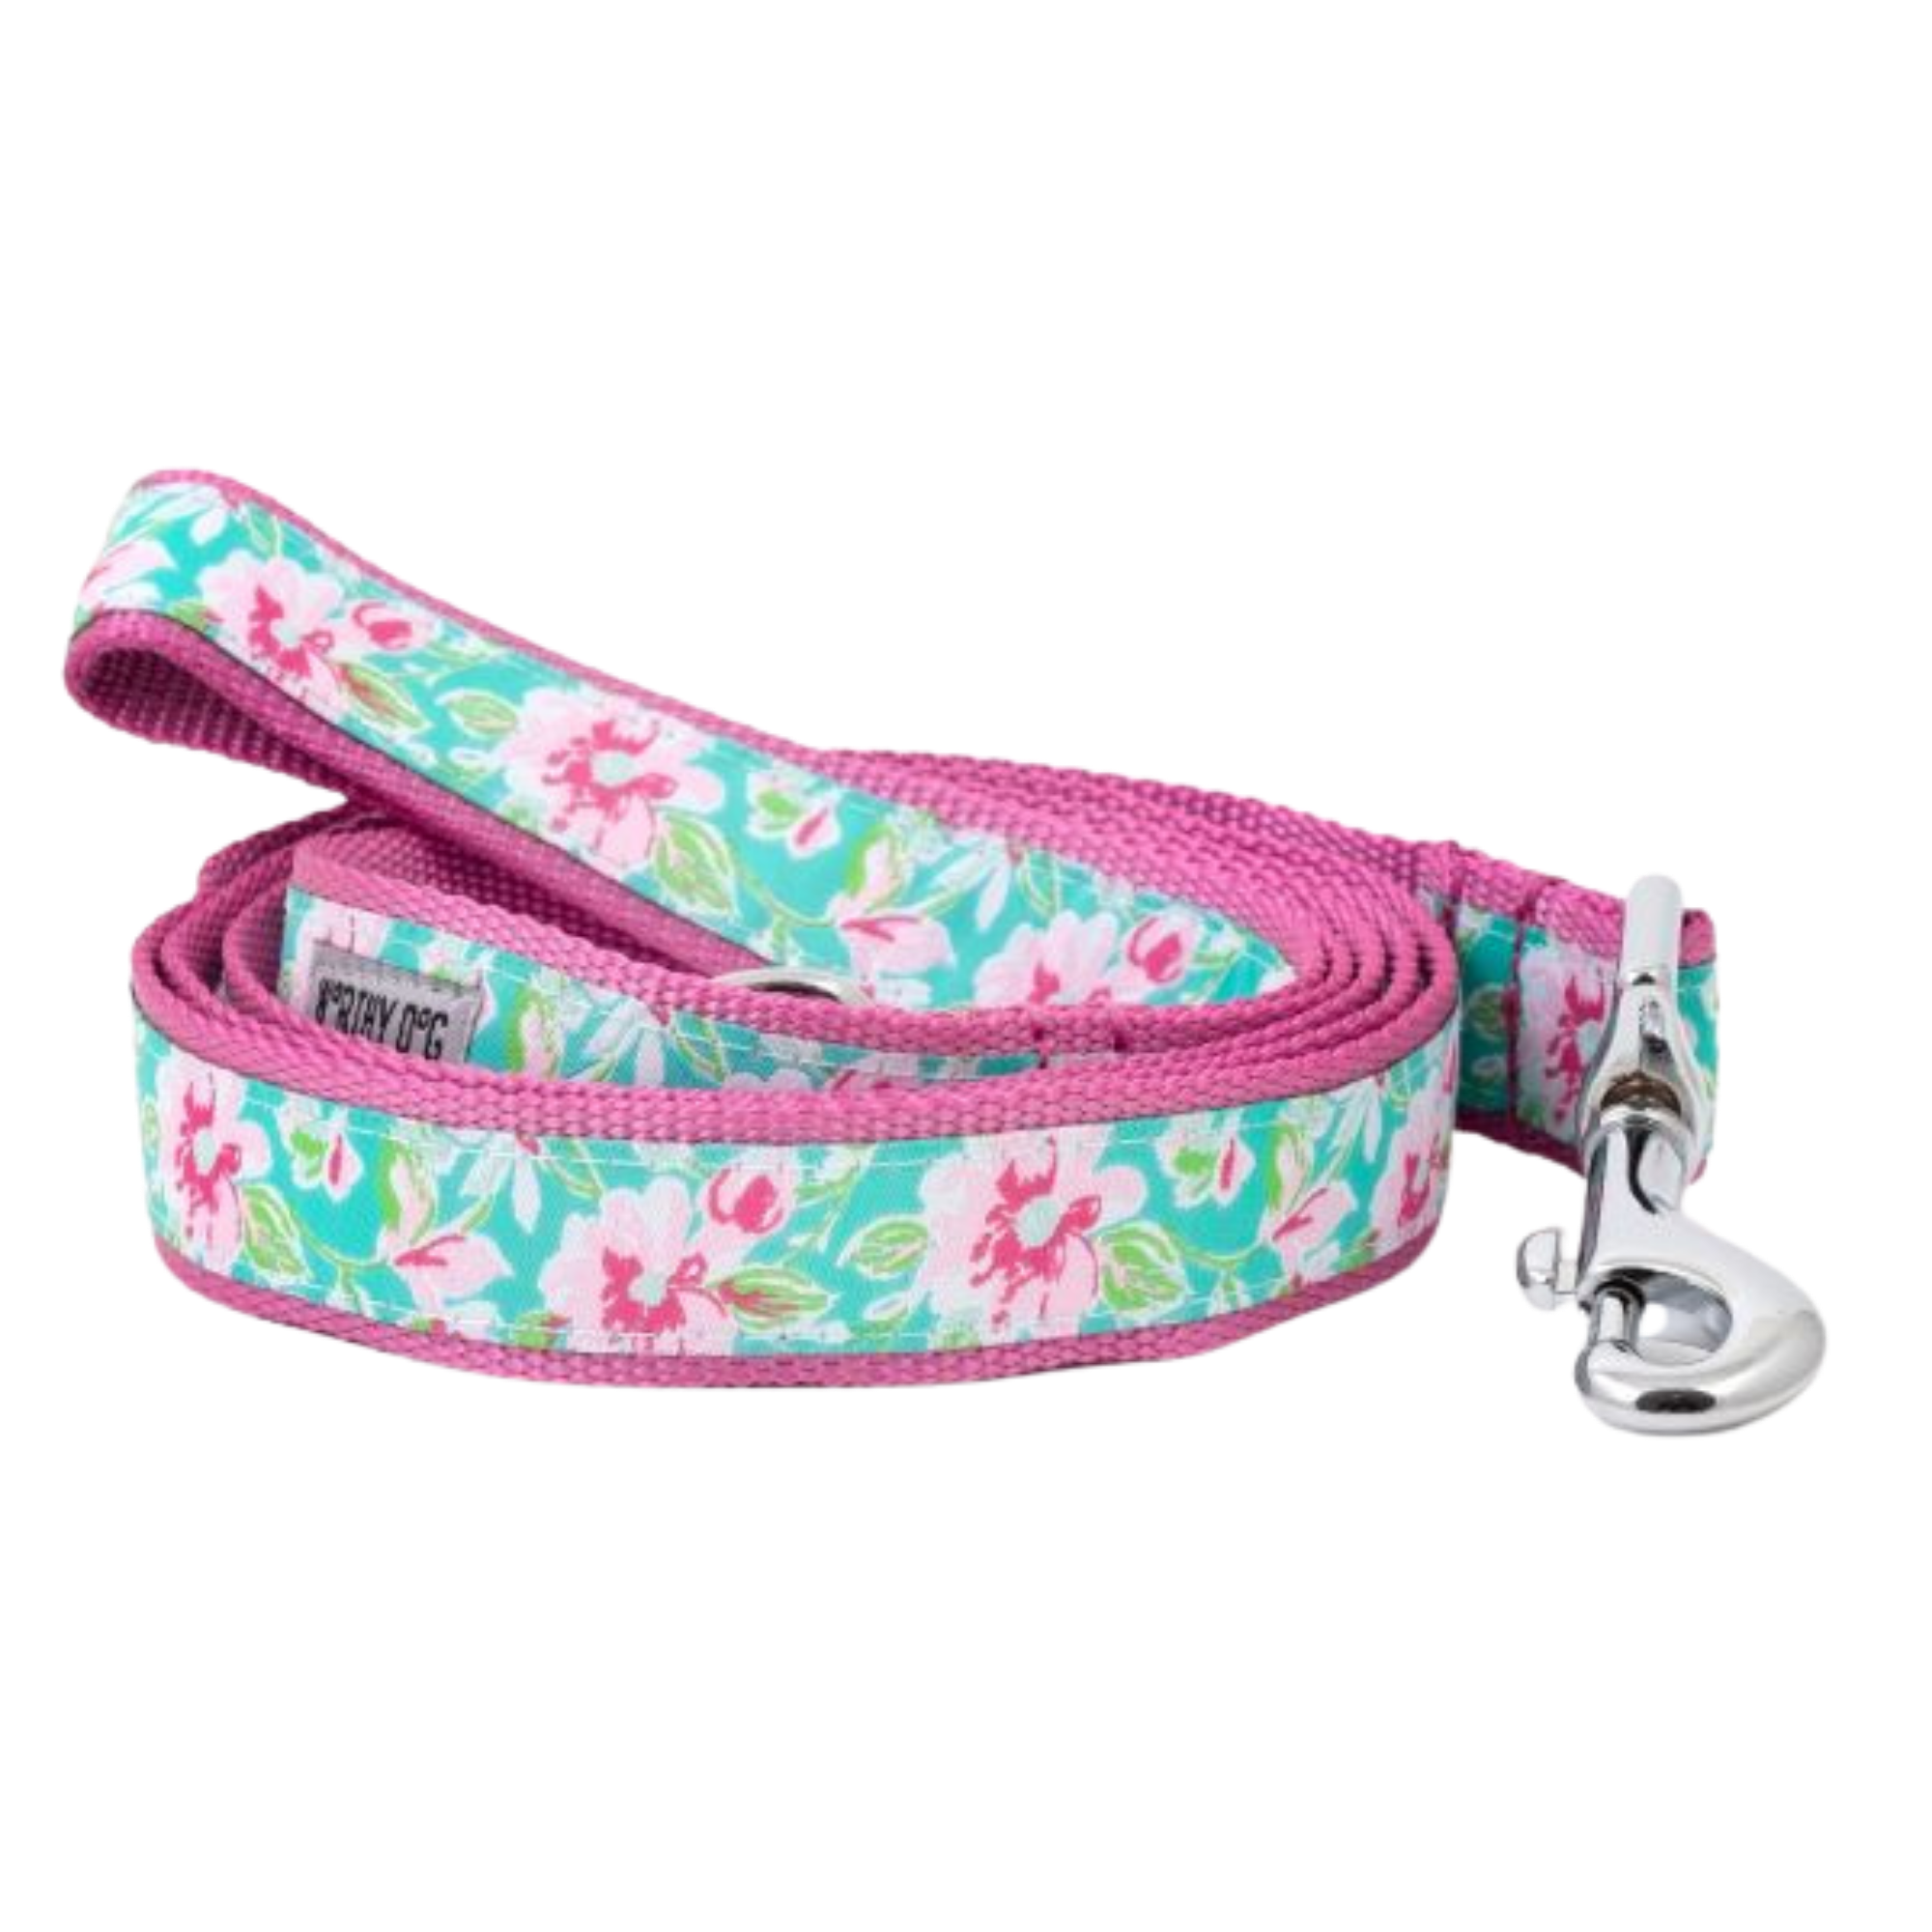 The Worthy Dog Watercolor Floral Dog Lead 5 Foot - 1" Wide - Mutts & Co.